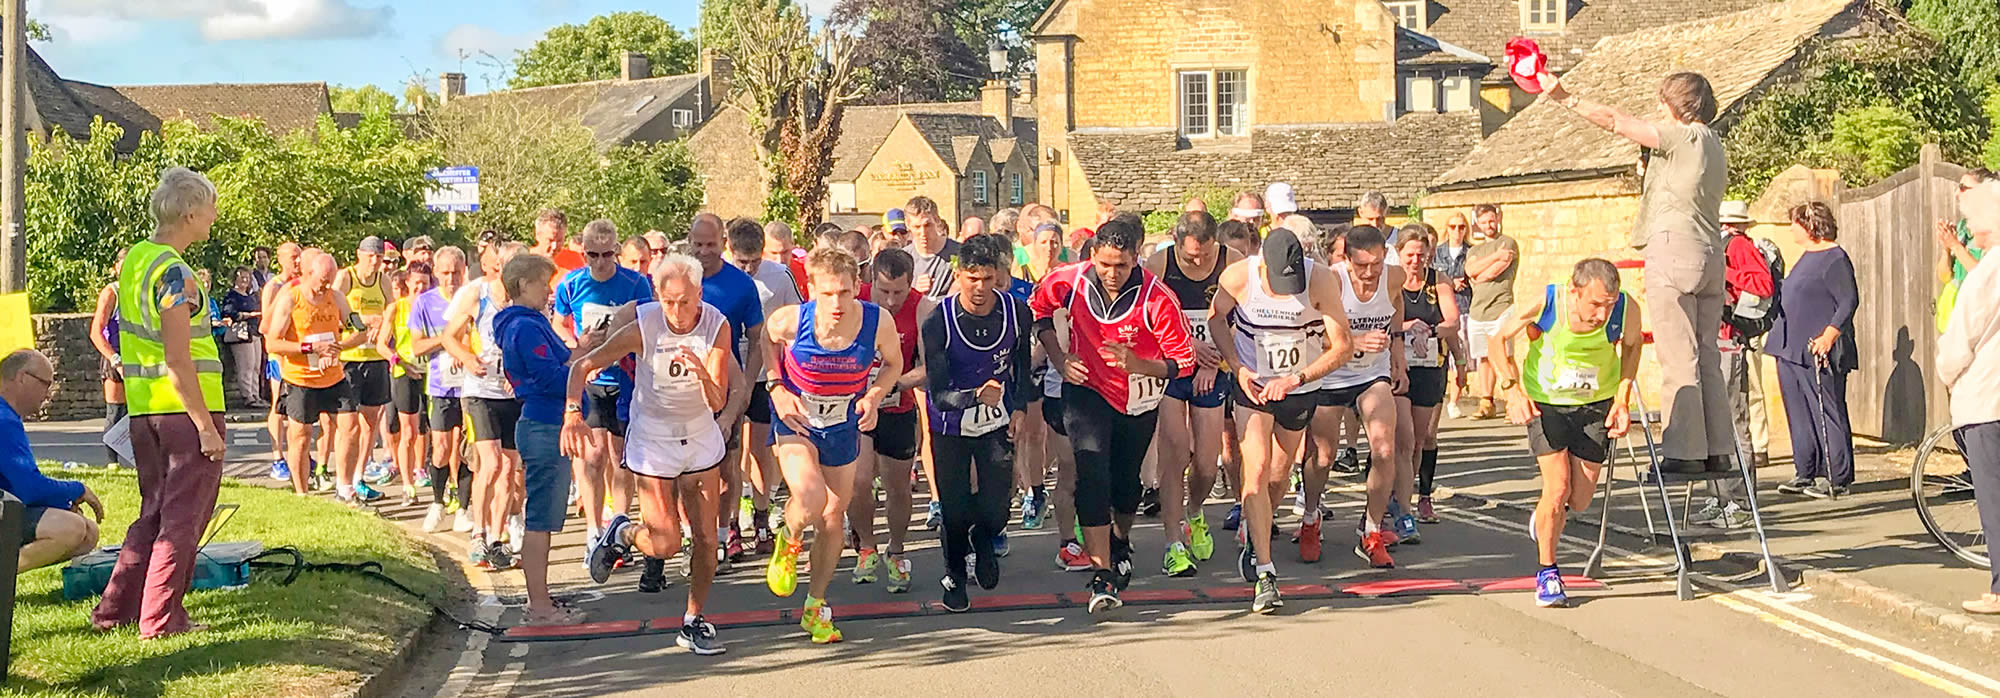 Start of the 2018 Humph's Hilly Half